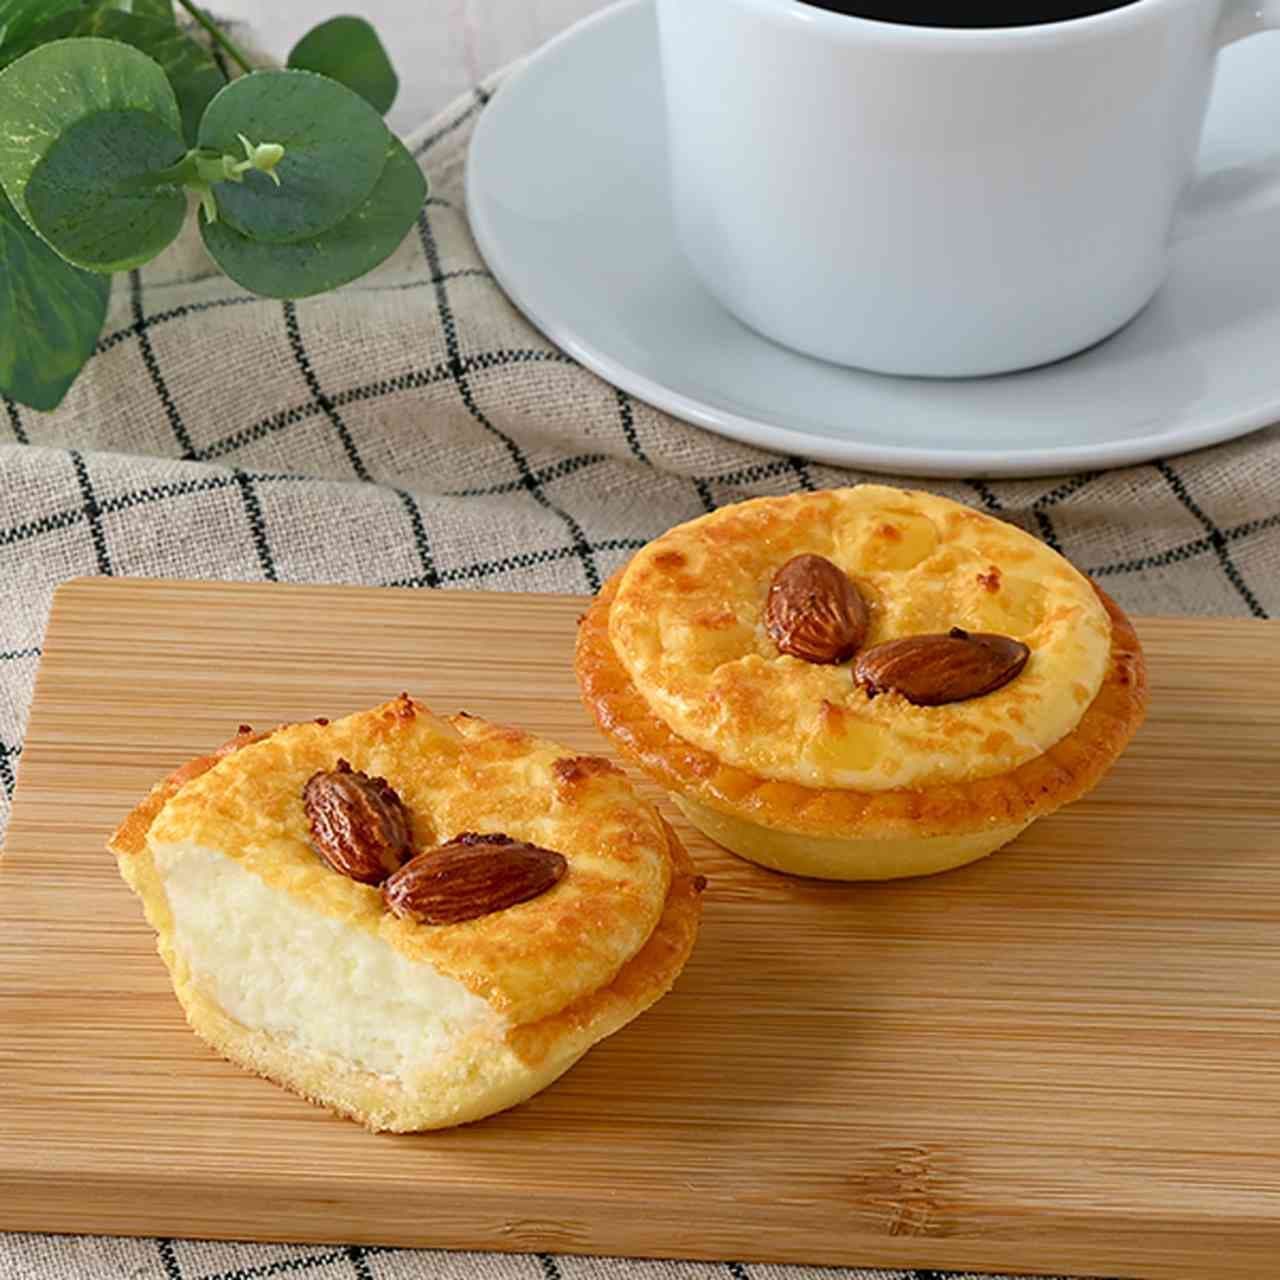 Famima "Butter-scented baked cheese tart - using four kinds of cheese